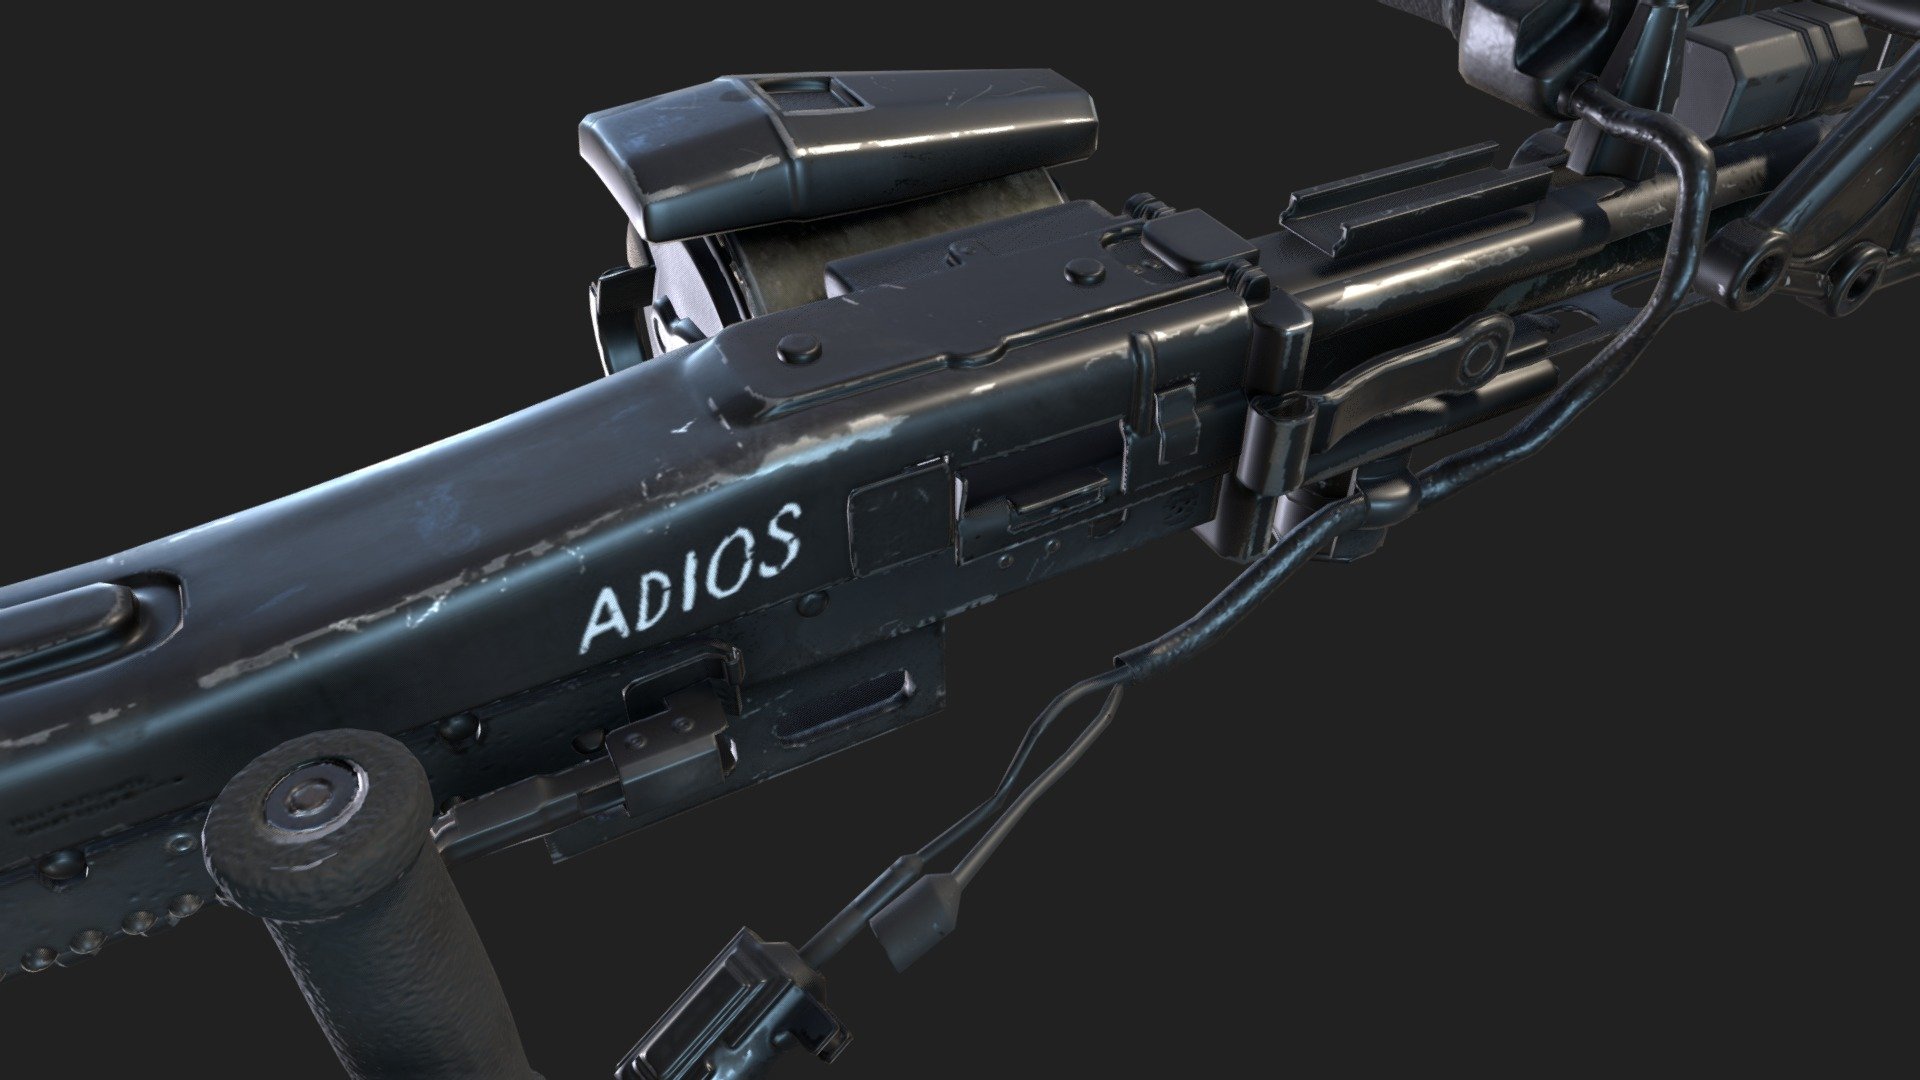 Fan art of a gun design I thought was really funky and inspired - "Aliens" Smart Rifle - 3D model by KonradSilver 3d model